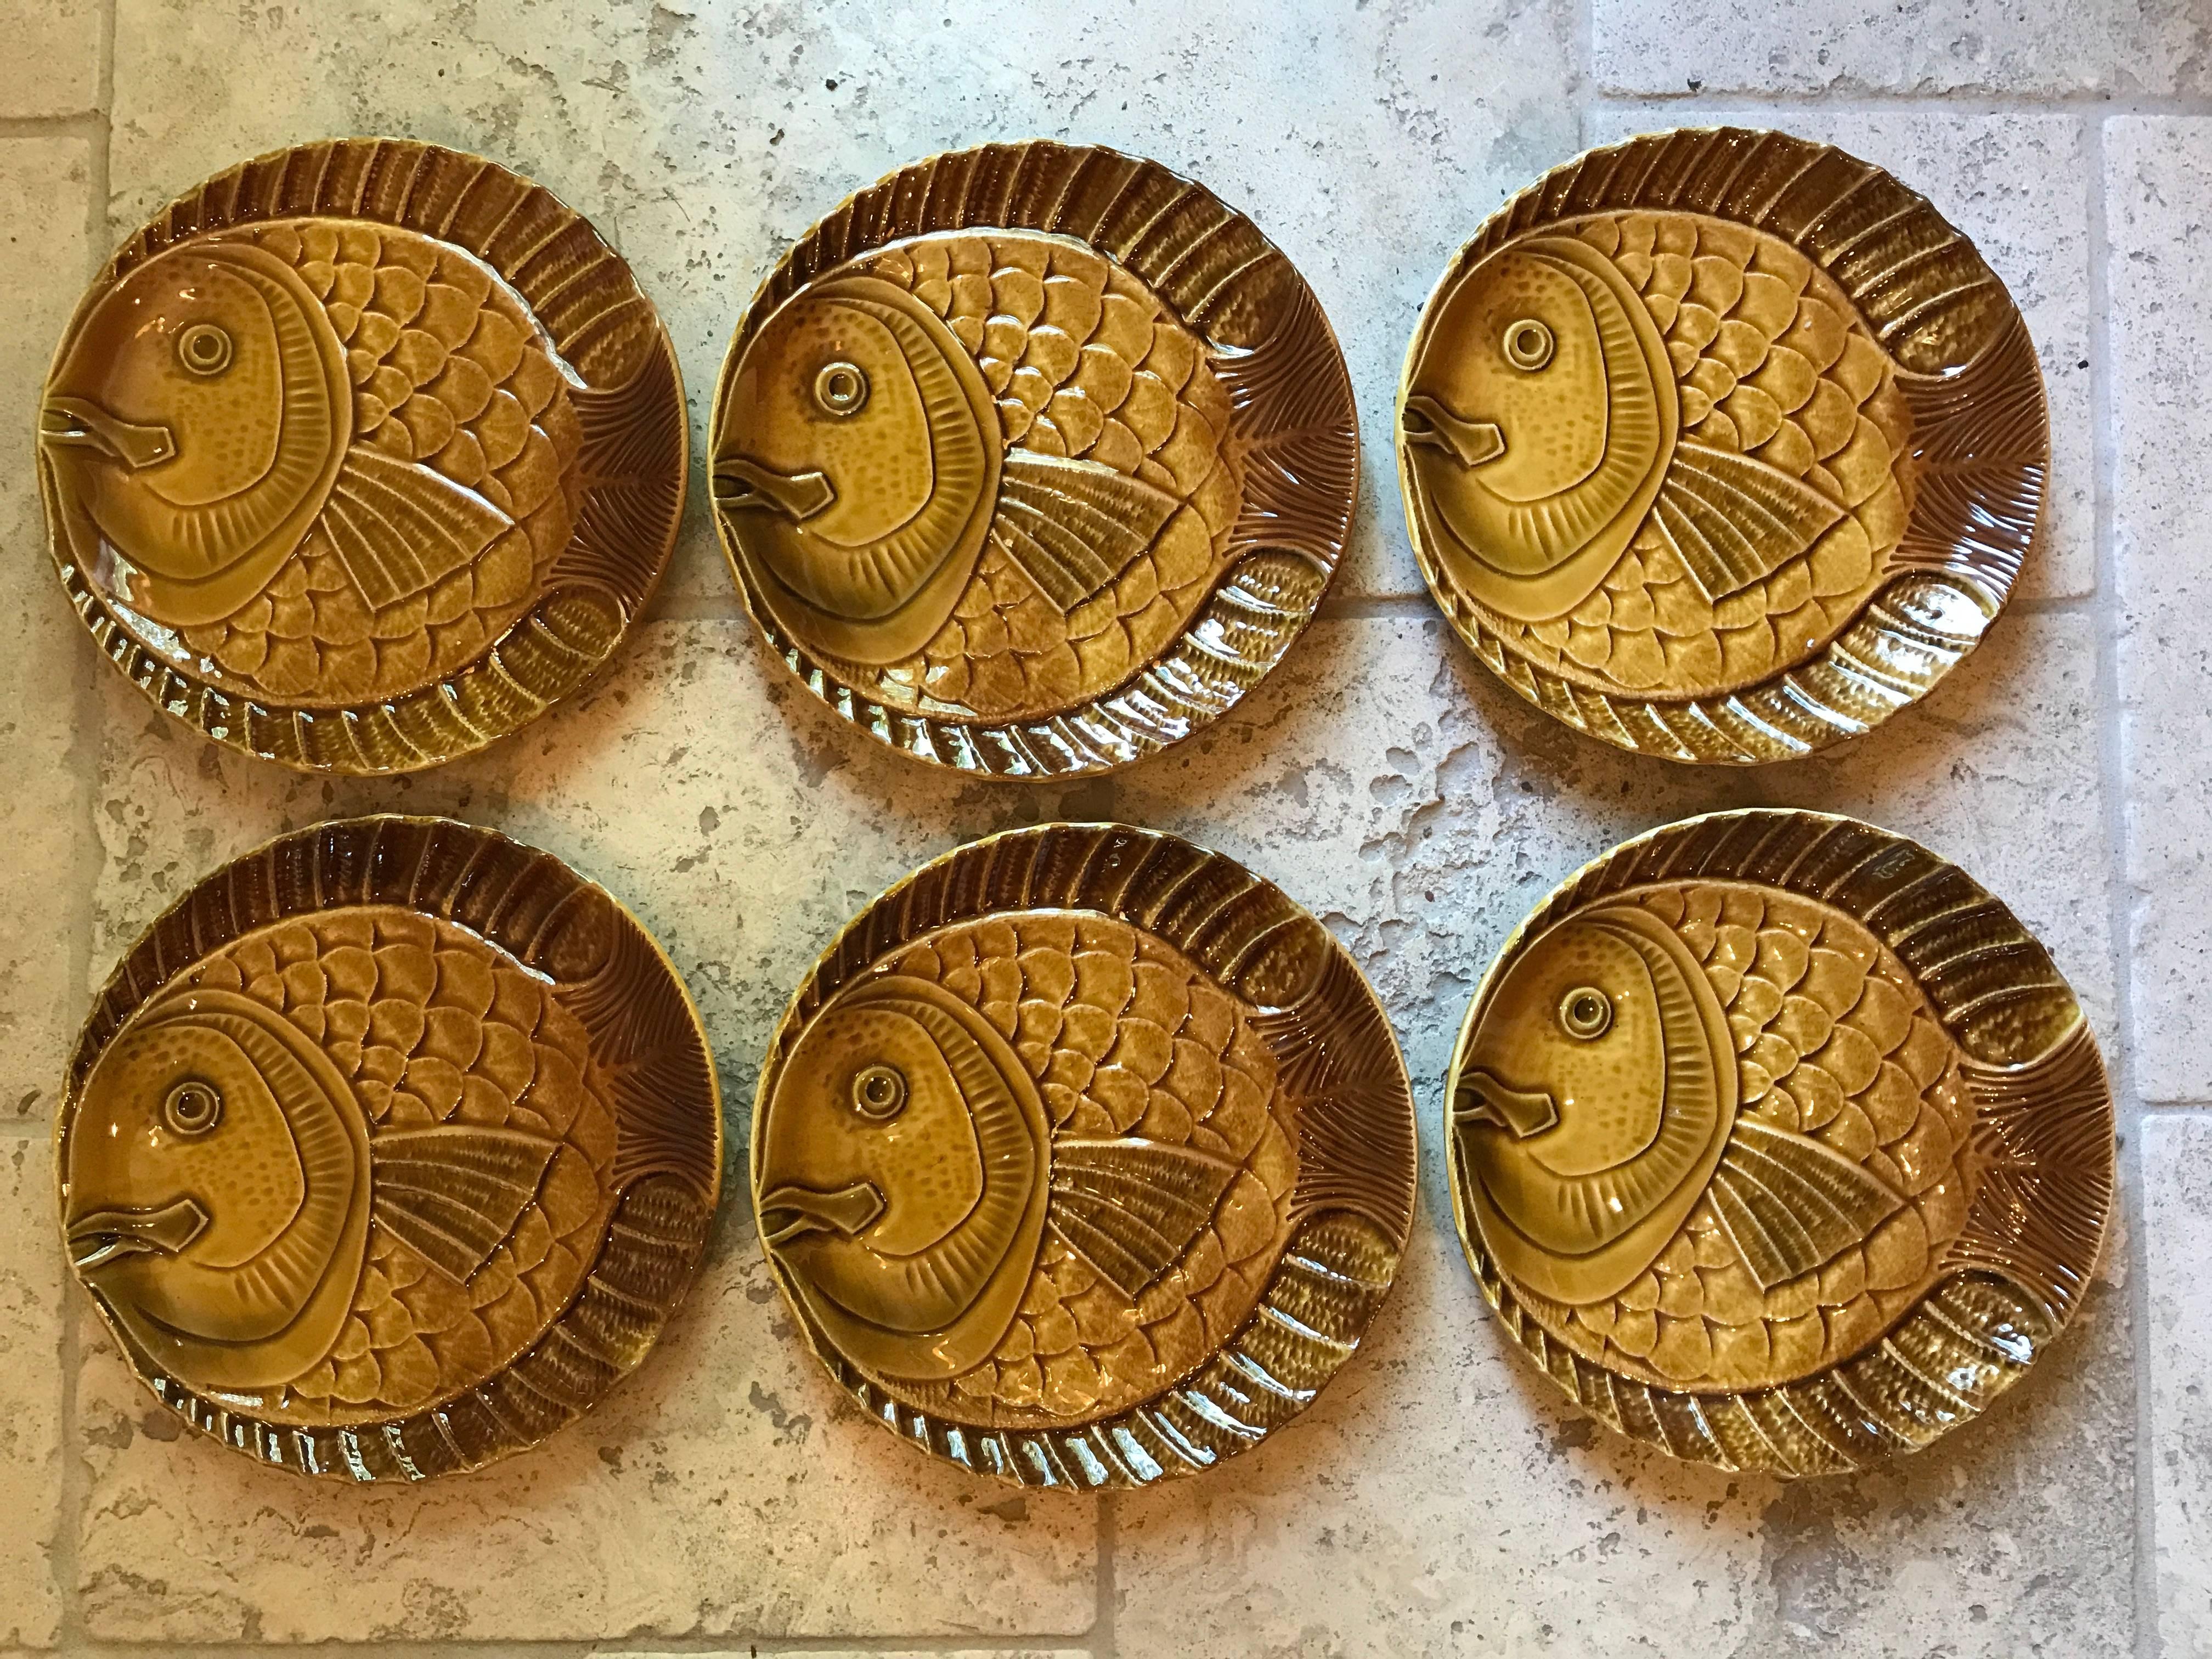 This wonderful and scarce set of original handcrafted, hand glazed fish plates from Sarreguemines, France are impressive in design, quality, and sure to garner favourable dinner time conversation. Lovely to touch.

Set of five (5) + we will